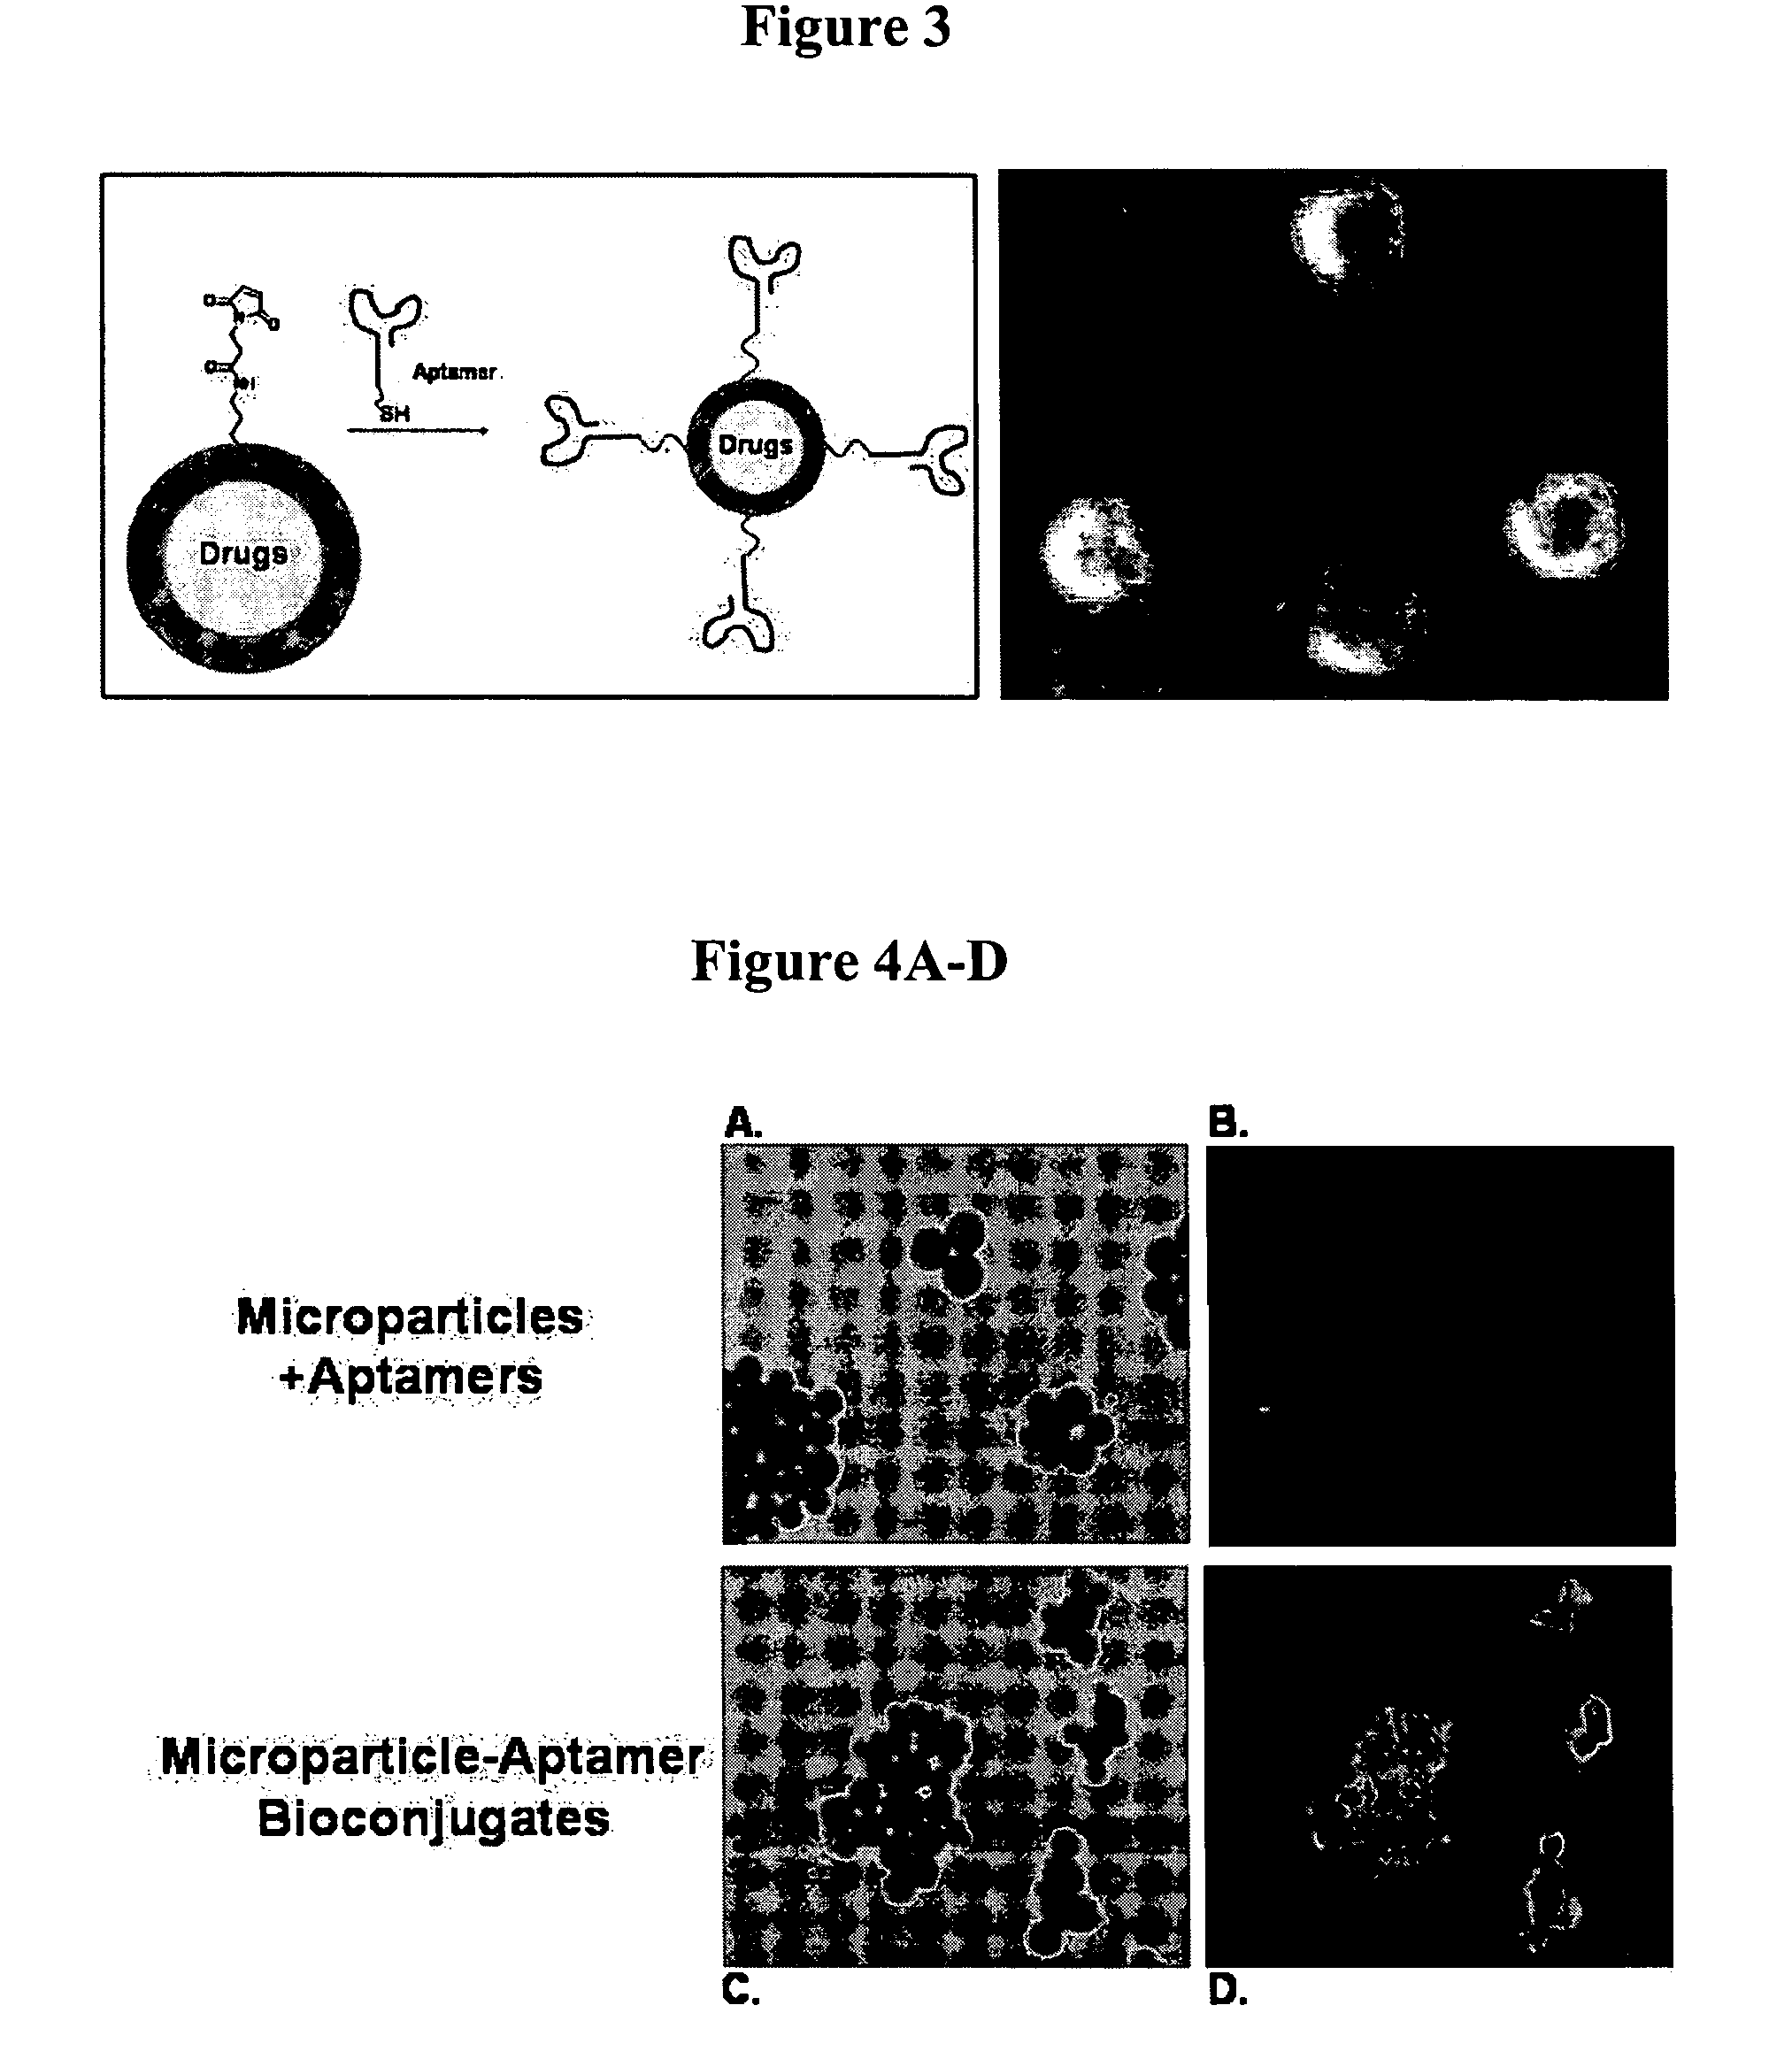 Controlled release polymer nanoparticle containing bound nucleic acid ligand for targeting